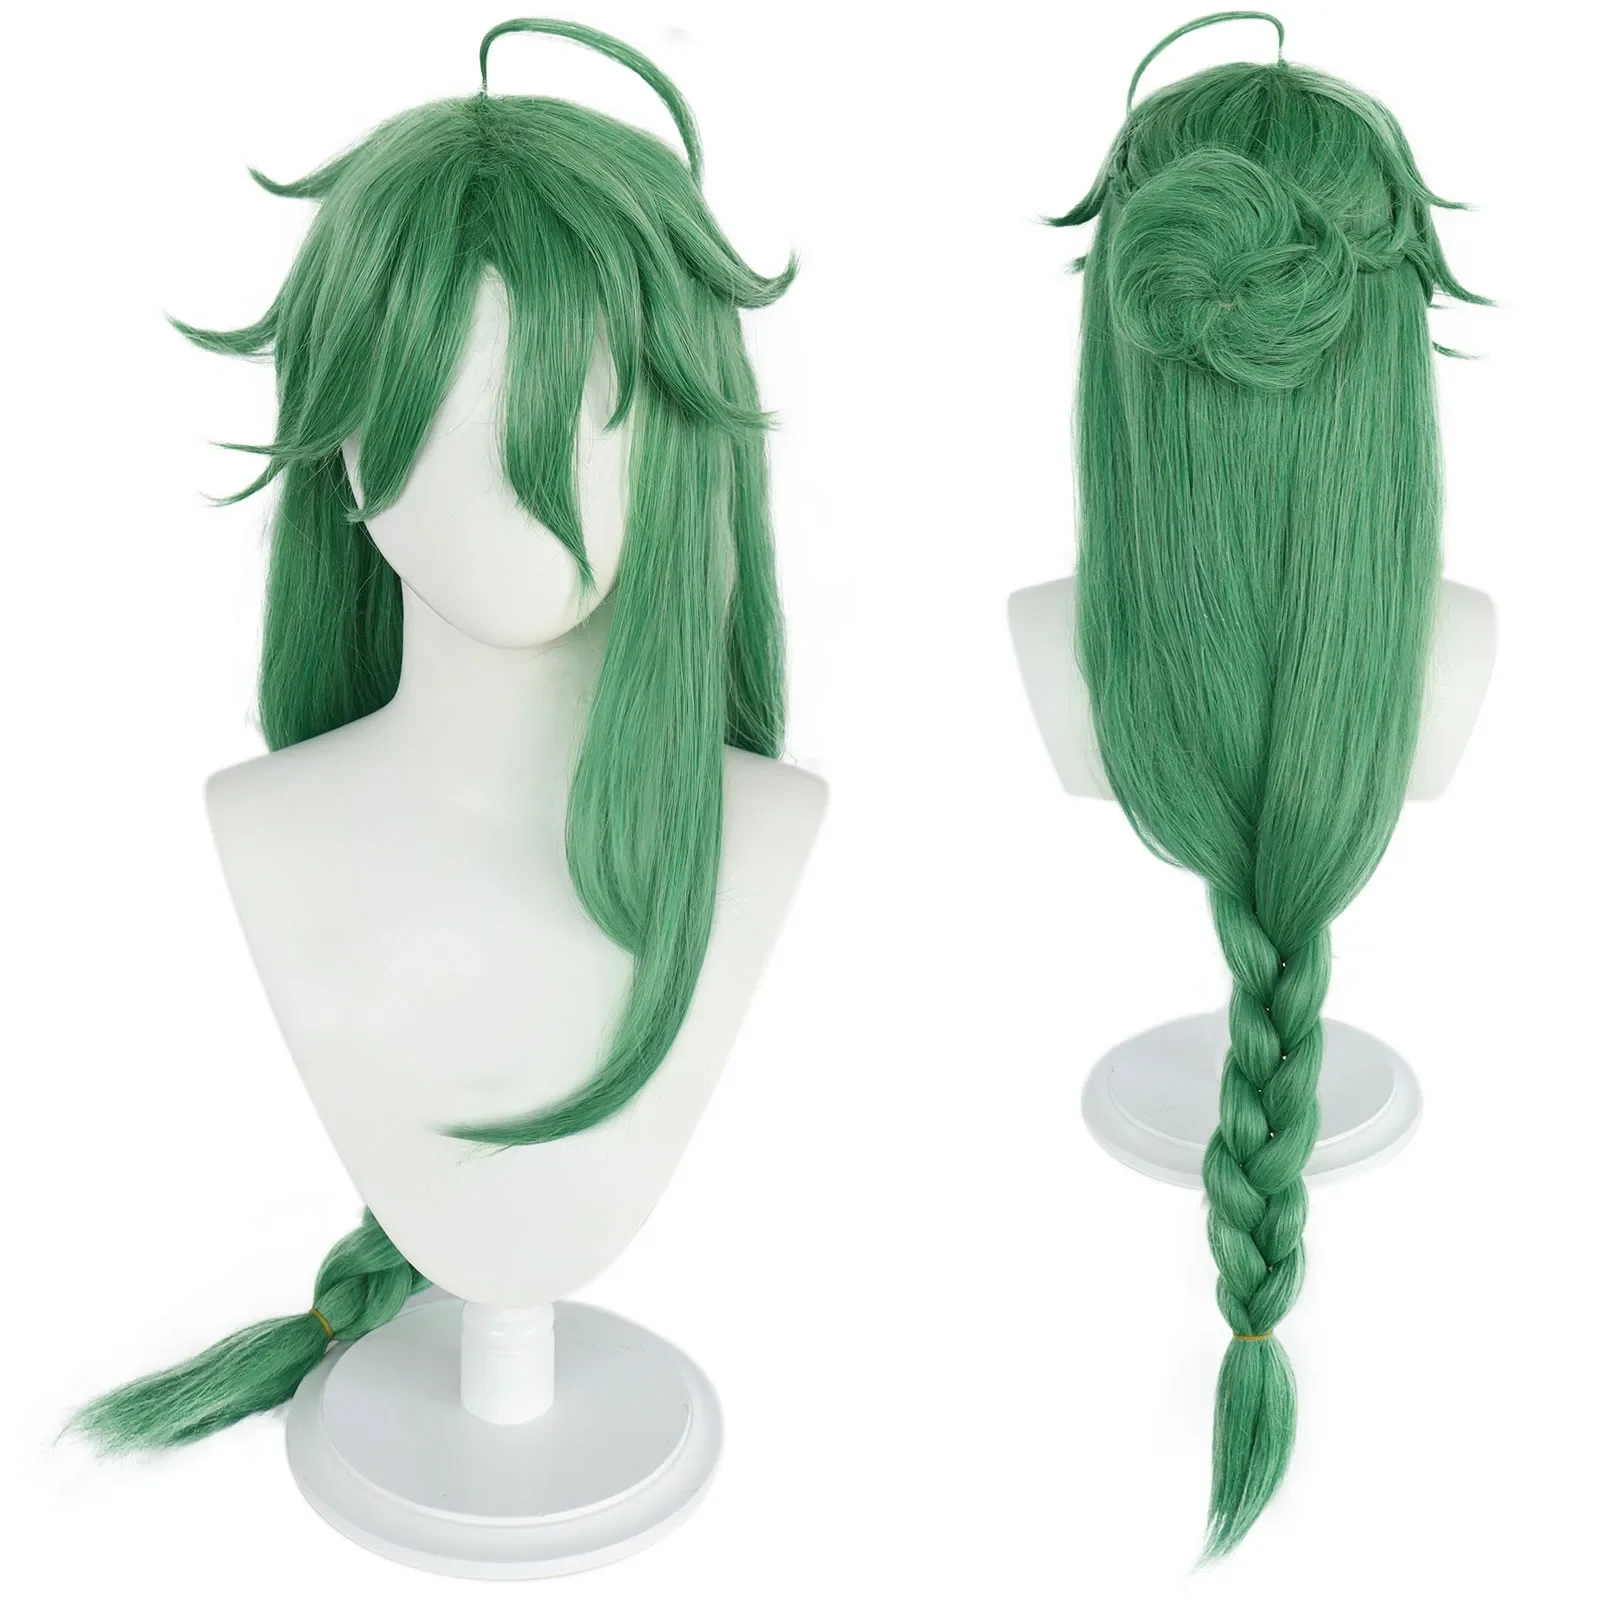 

80cm Lolita Long Green Braided Cosplay Wig with Bangs Extra Long Ponytail Updo Bun Wig for Halloween Christmas School